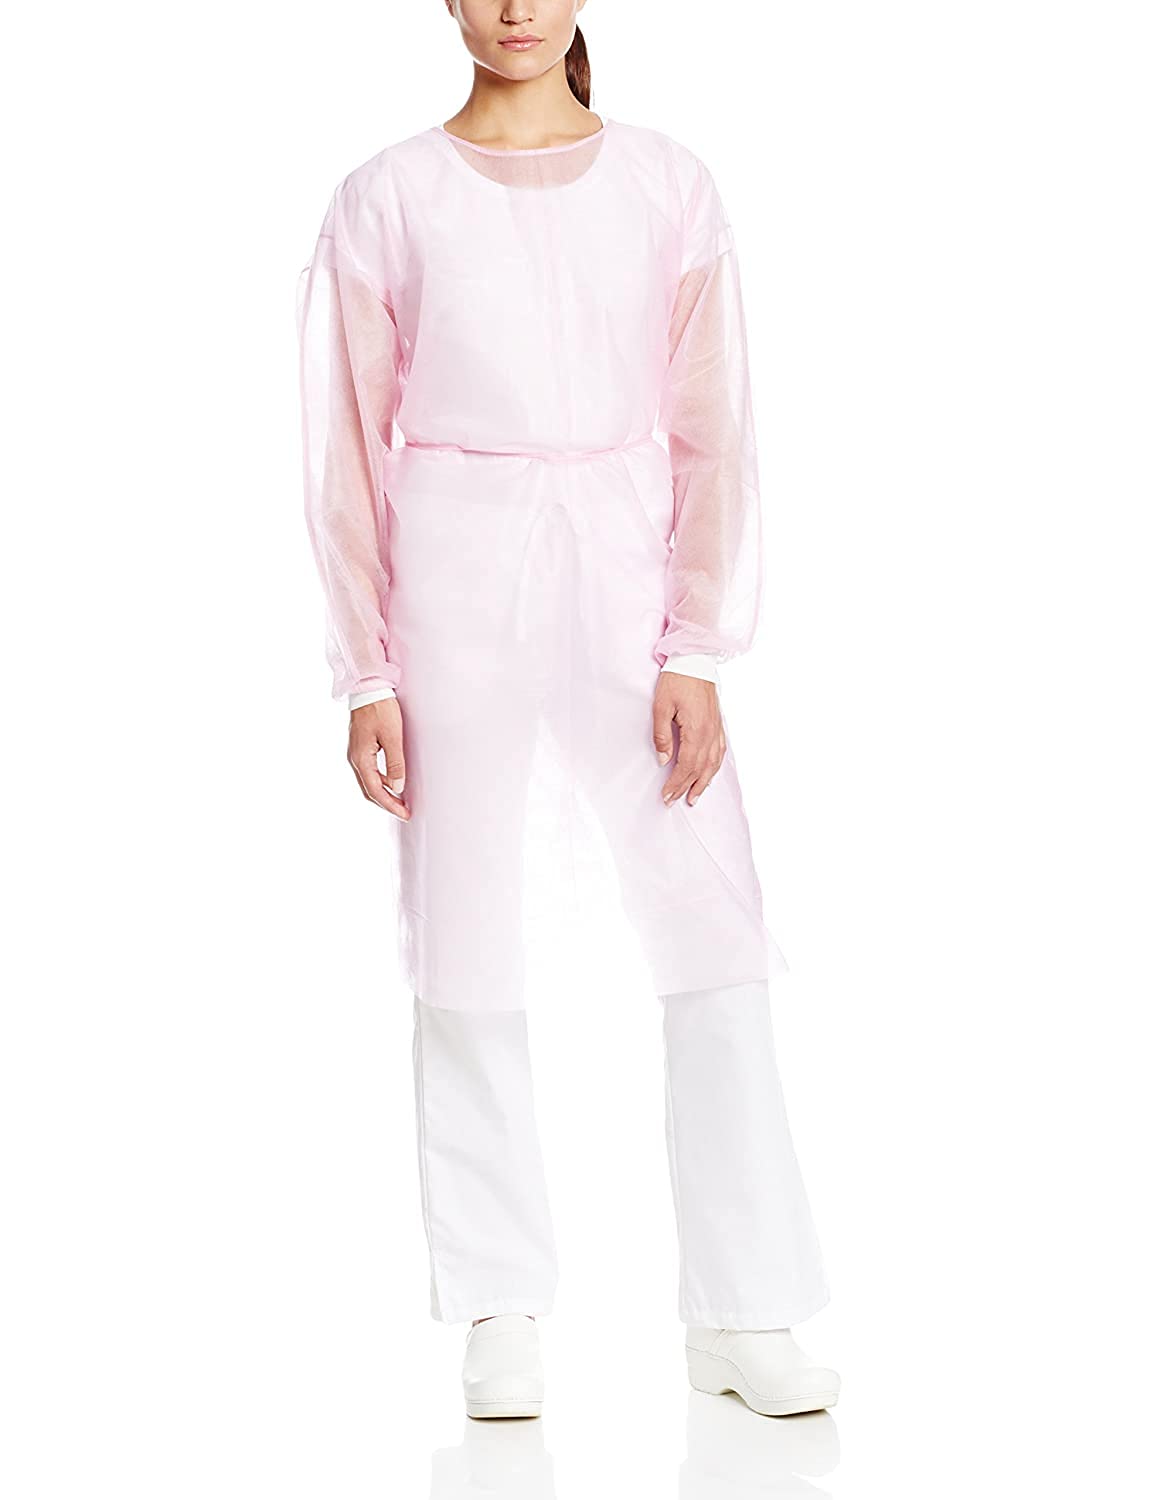 ValuMax Disposable Isolation Gown with Knit Cuff